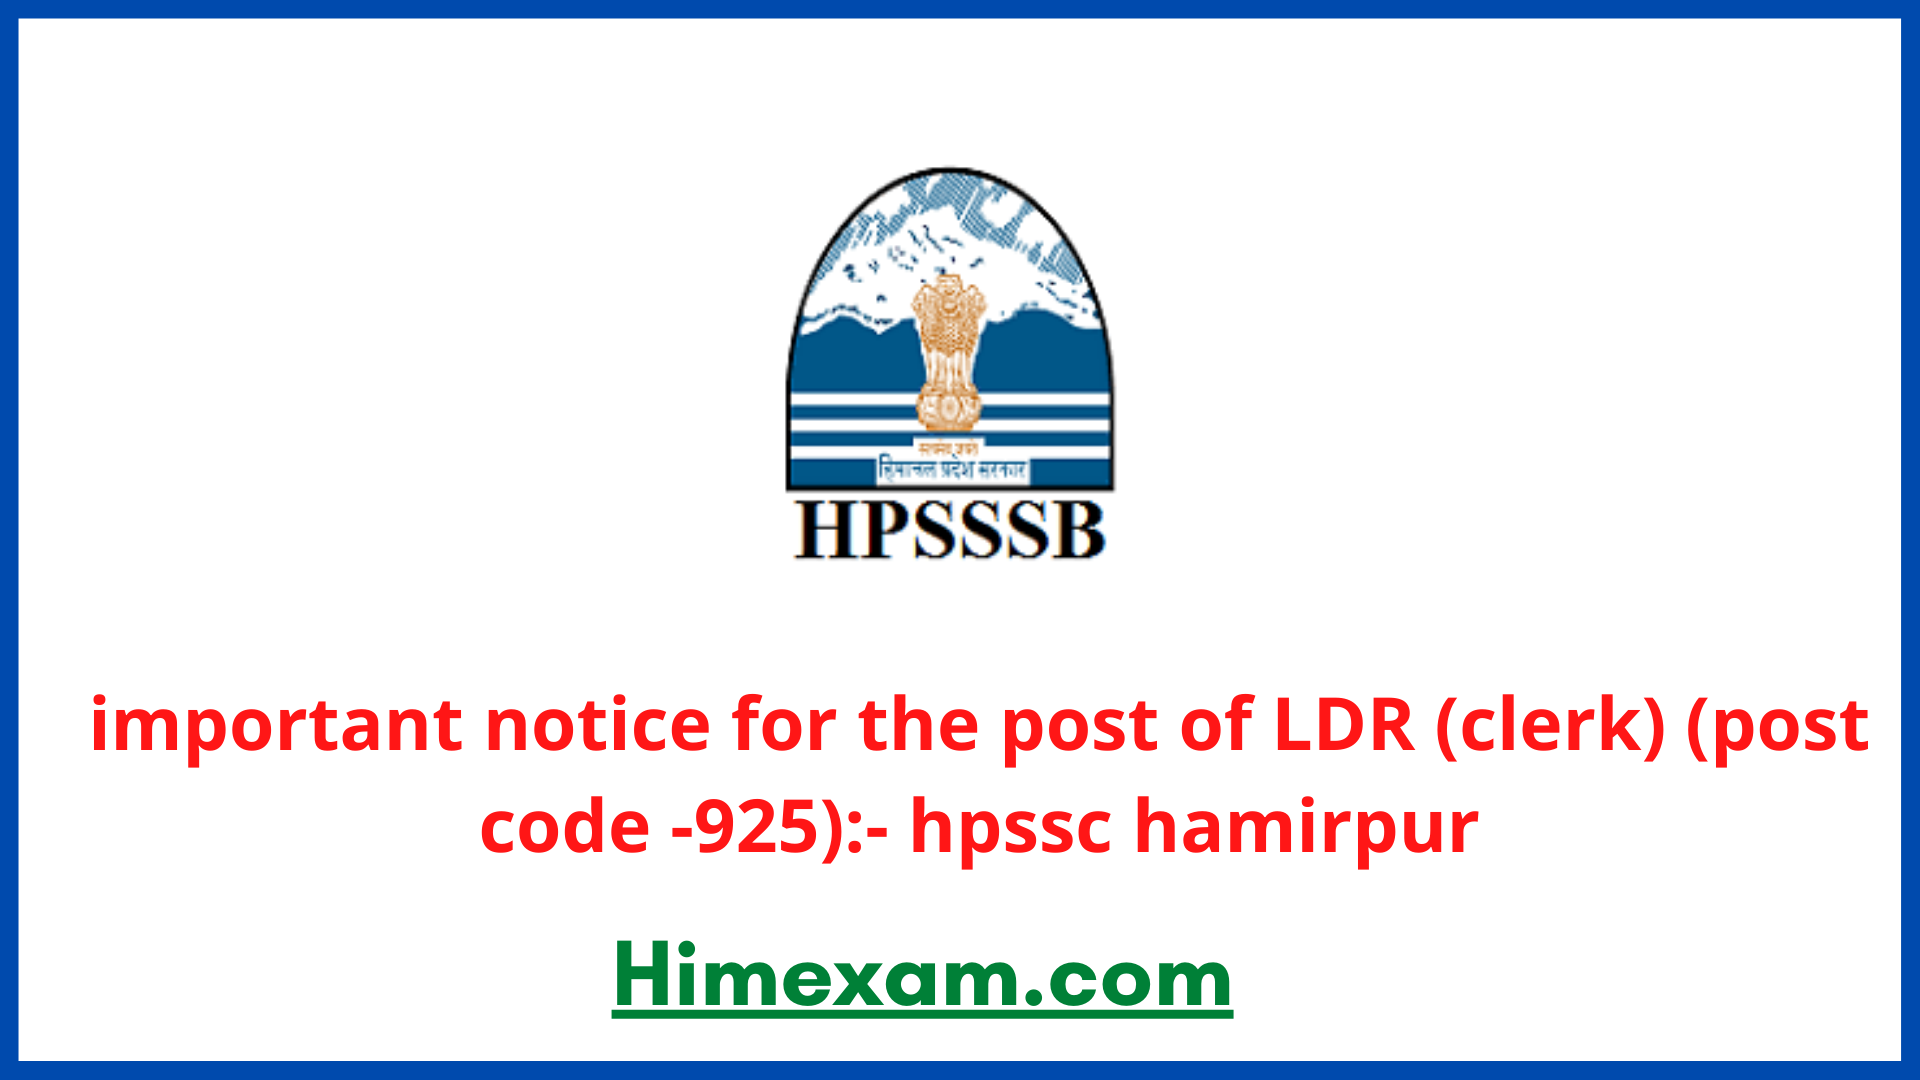 important notice for the post of LDR (clerk) (post code -925):- hpssc hamirpur